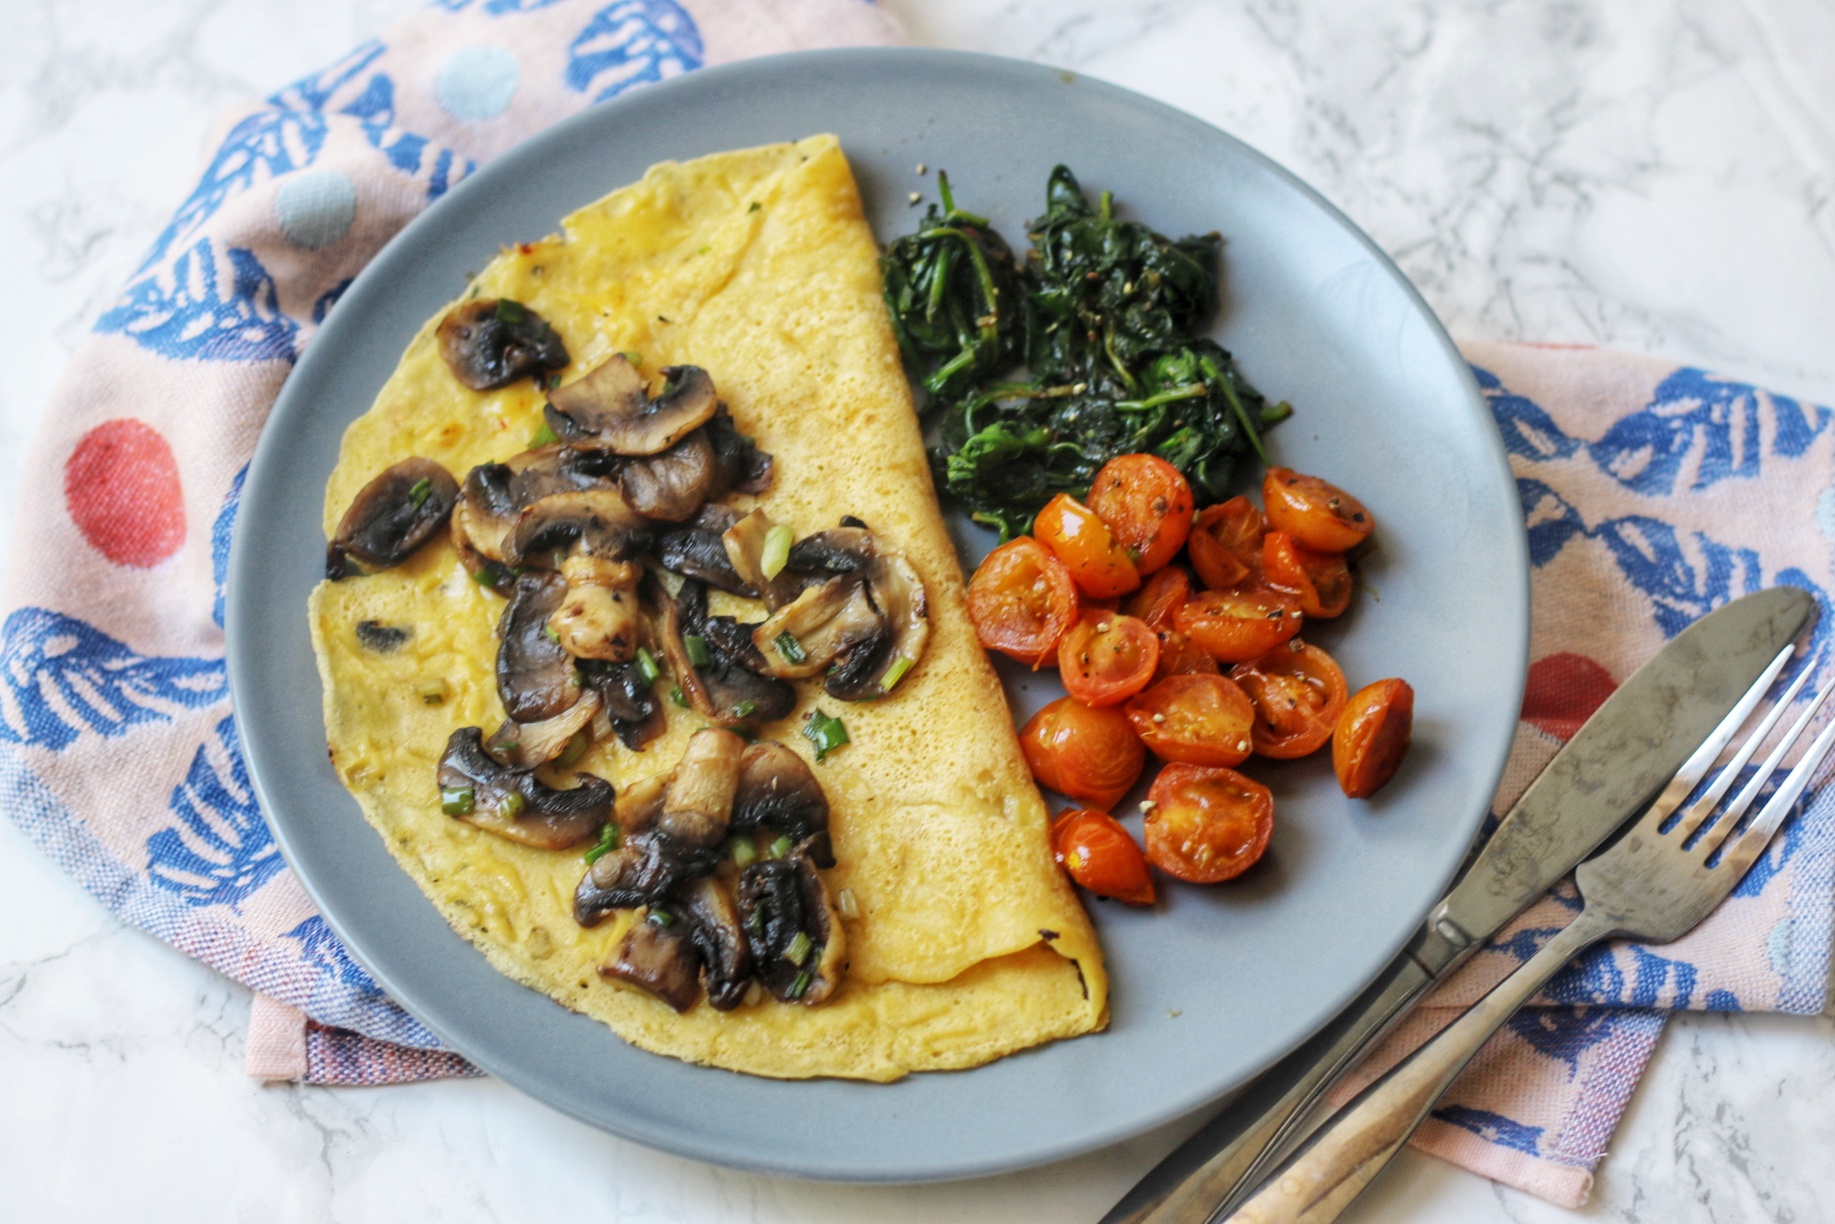 Savoury Vegan Crêpe topped with mushrooms, spinach and tomatoes